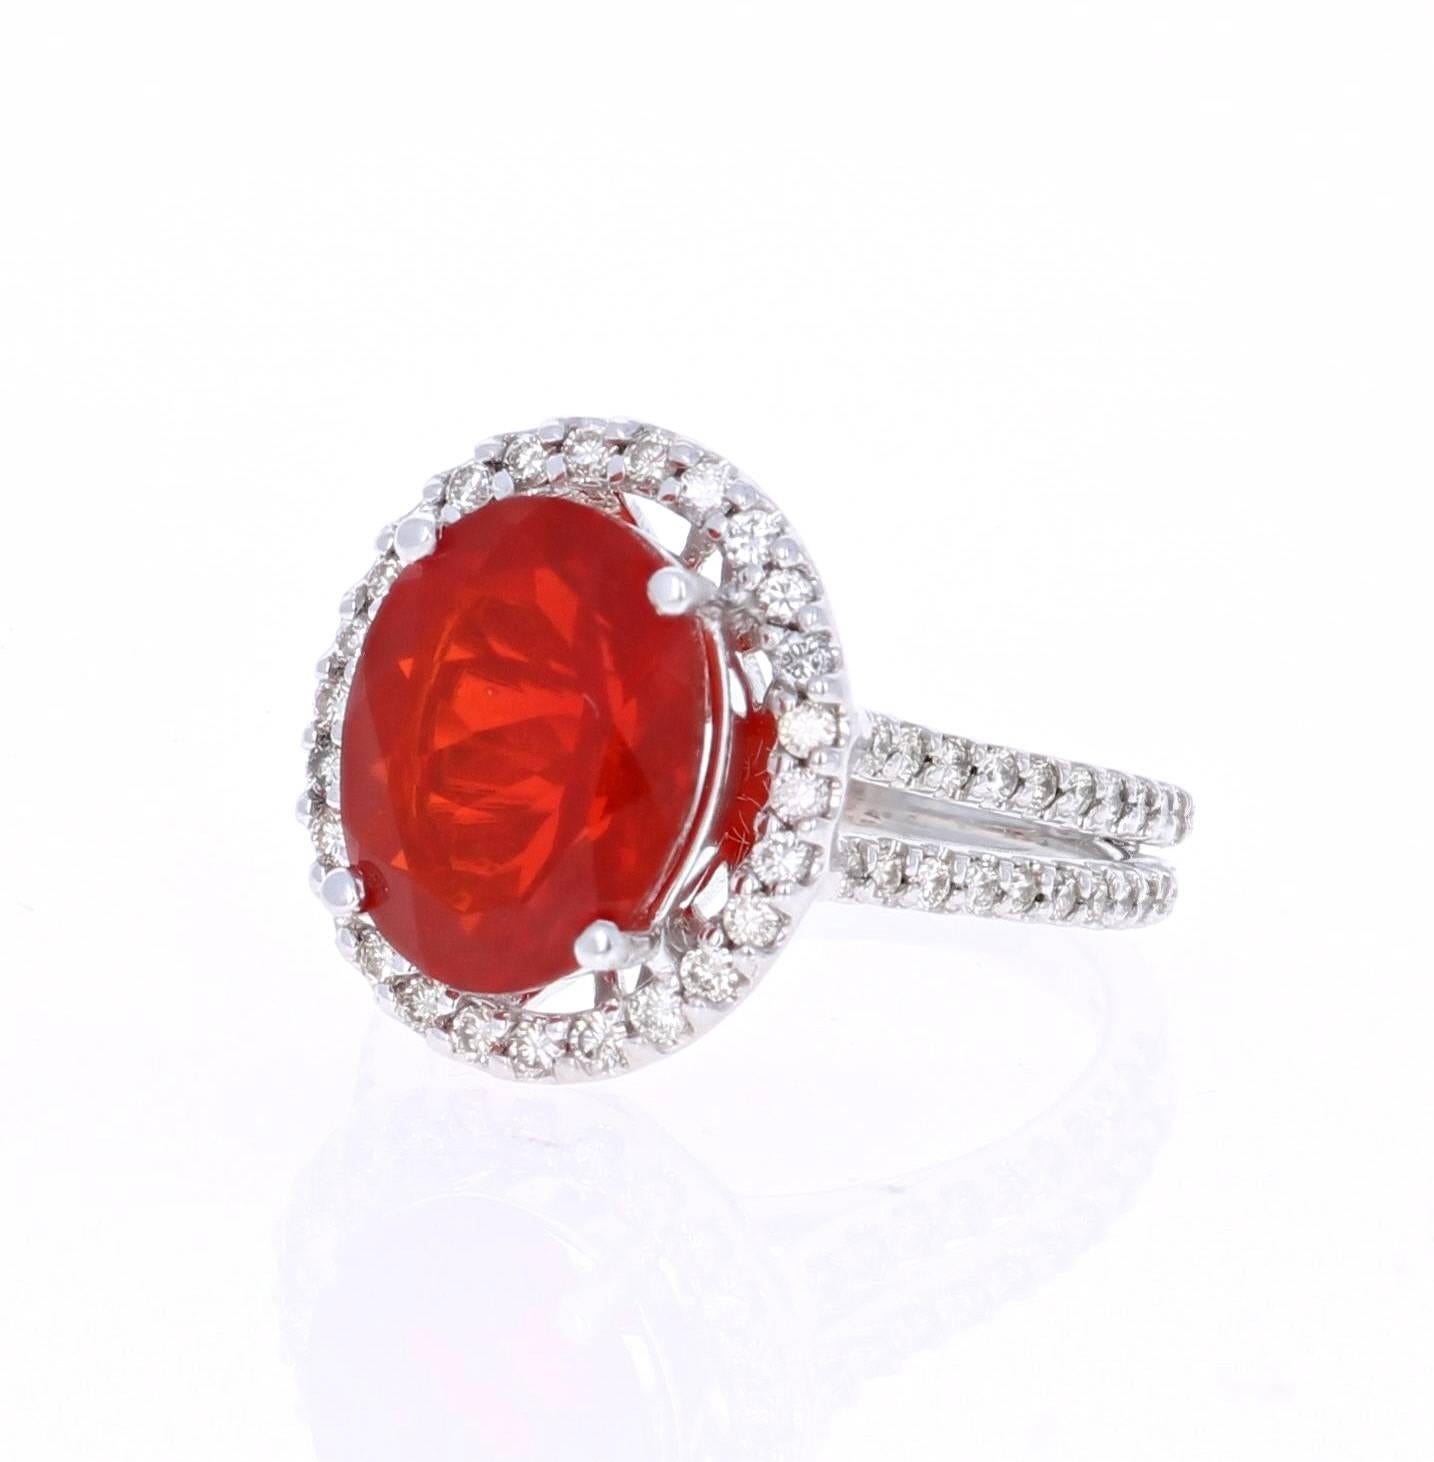 Beautiful Fire Opal and Diamond Ring that can easily substitute for a unique Engagement Ring. This ring has an Oval Cut 3.82 carat Fire Opal in the center of the ring and is surrounded by a halo of 66 Round Cut Diamonds that weigh a total of 0.93